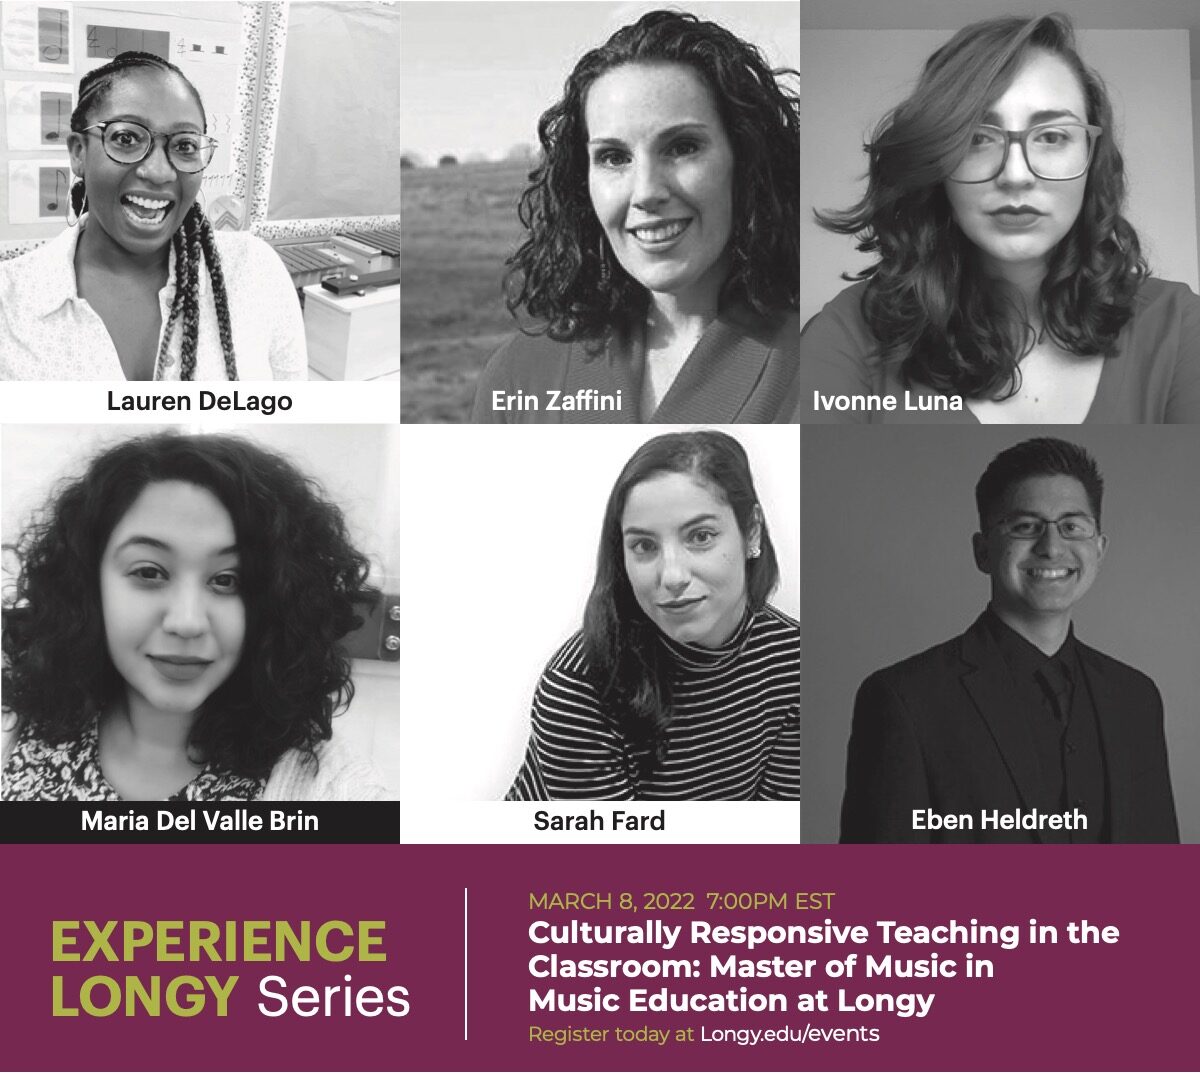 Experience Longy Series event March 8, 2022 announcement with headshots of Lauren DeLago, Erin Zaffini, Ivonne Luna, Maria Del Valle Brin, Sarah Fard, and Eben Heldreth